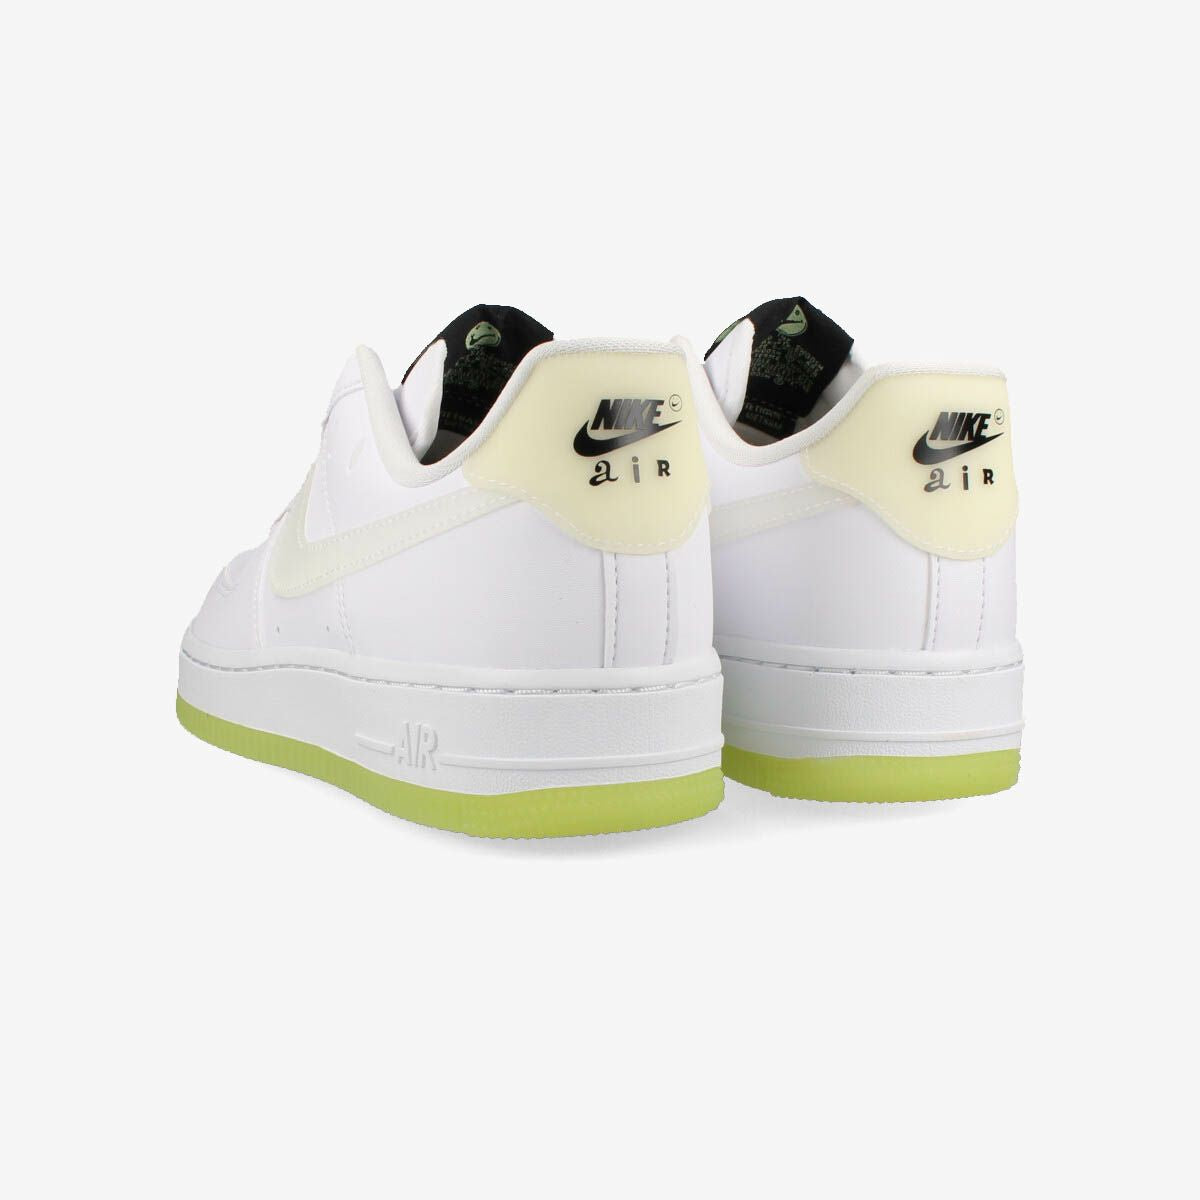 NIKE WMNS AIR FORCE 1 '07 LX [GLOW IN THE DARK] WHITE/BARELY VOLT